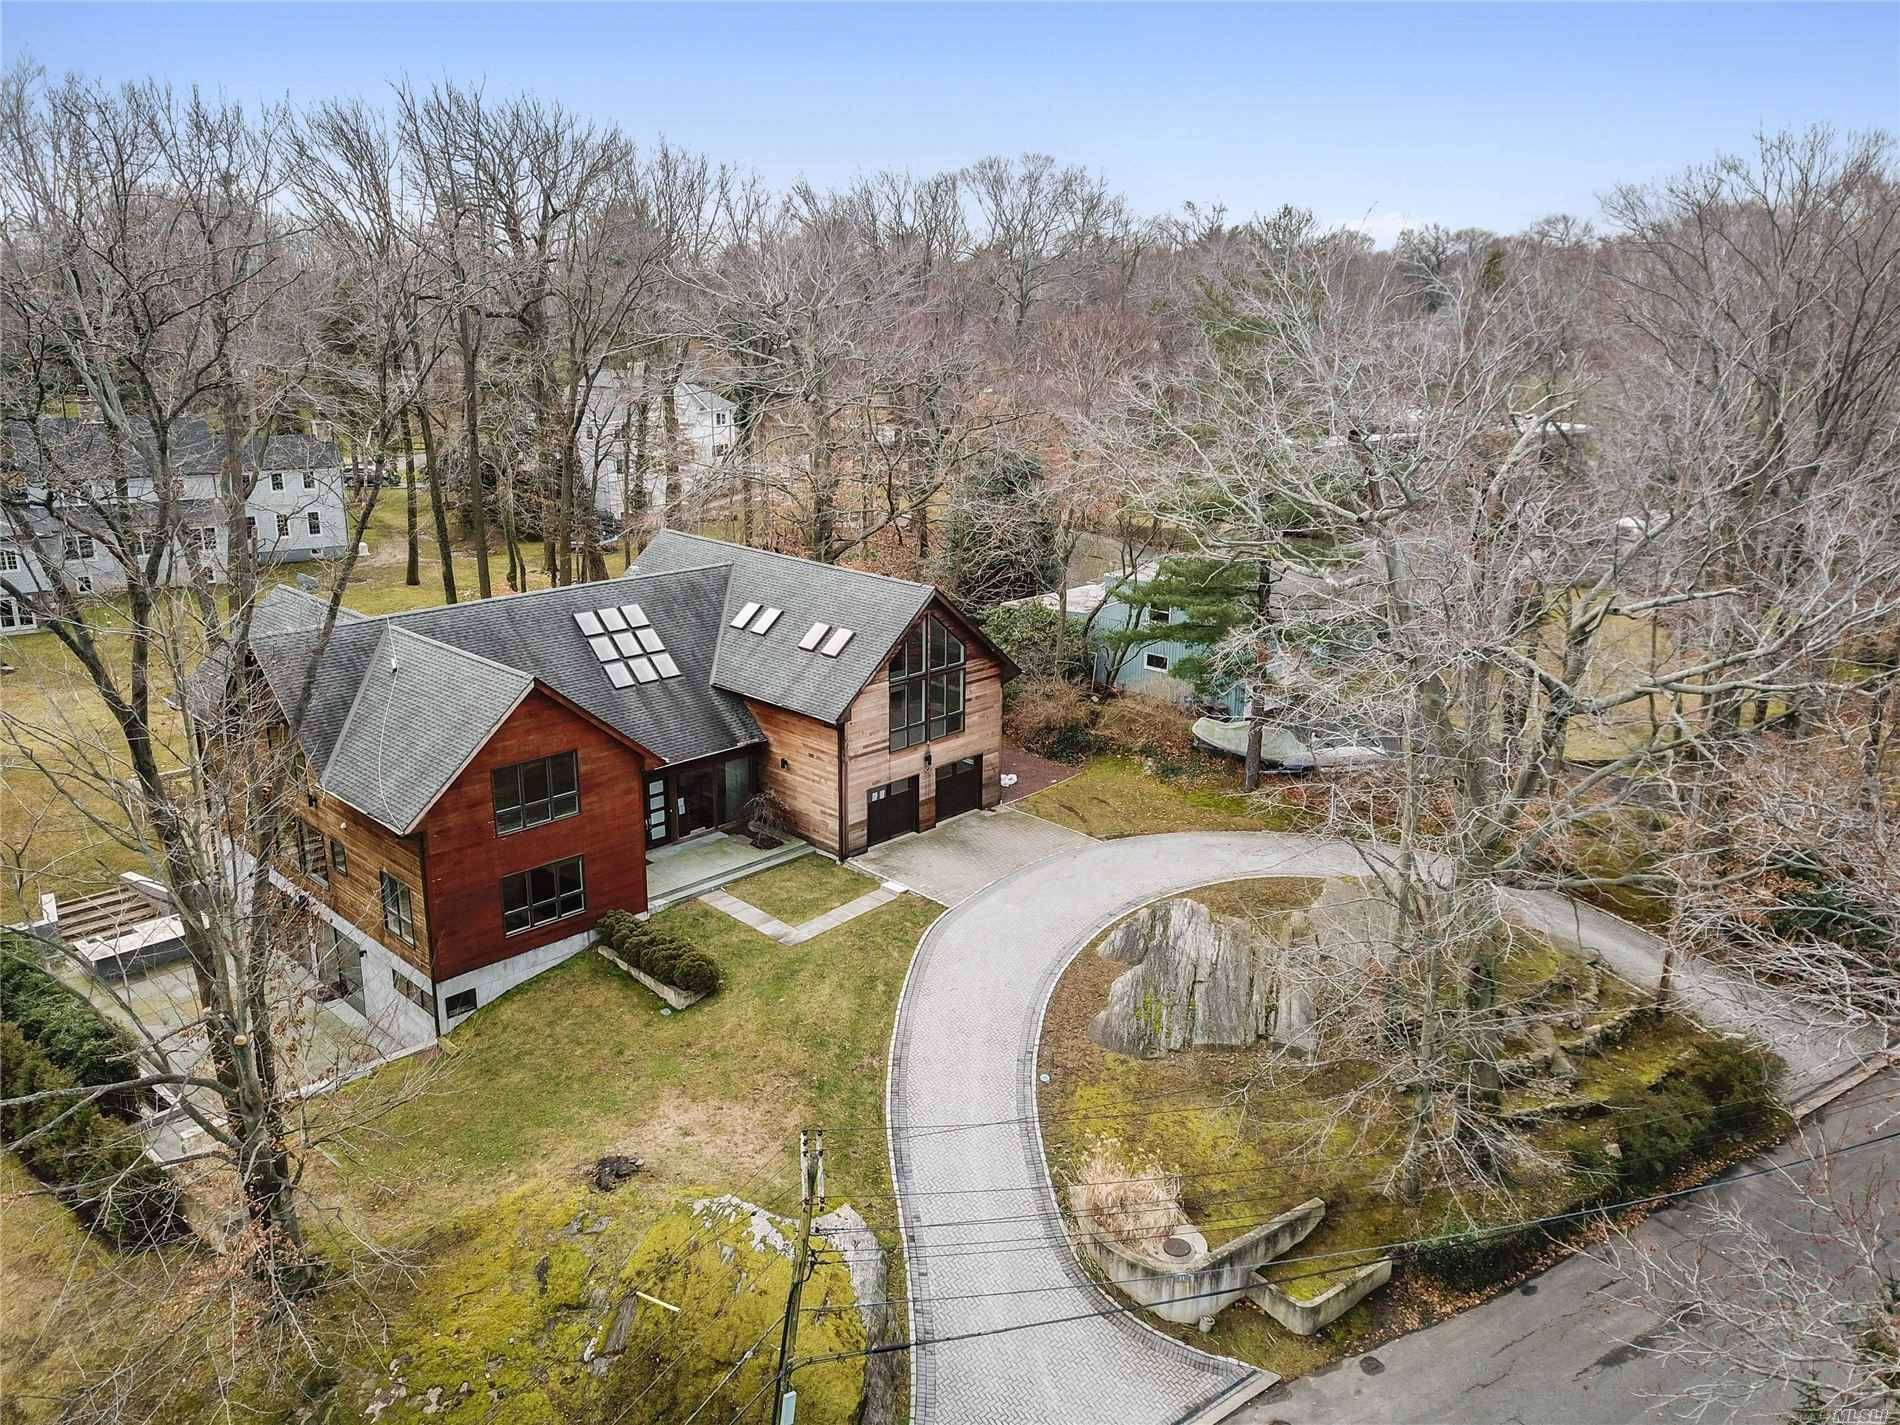 Rare Bank Owned Pelham Manor Contemporary With Large Light Filled Rooms Throughout.